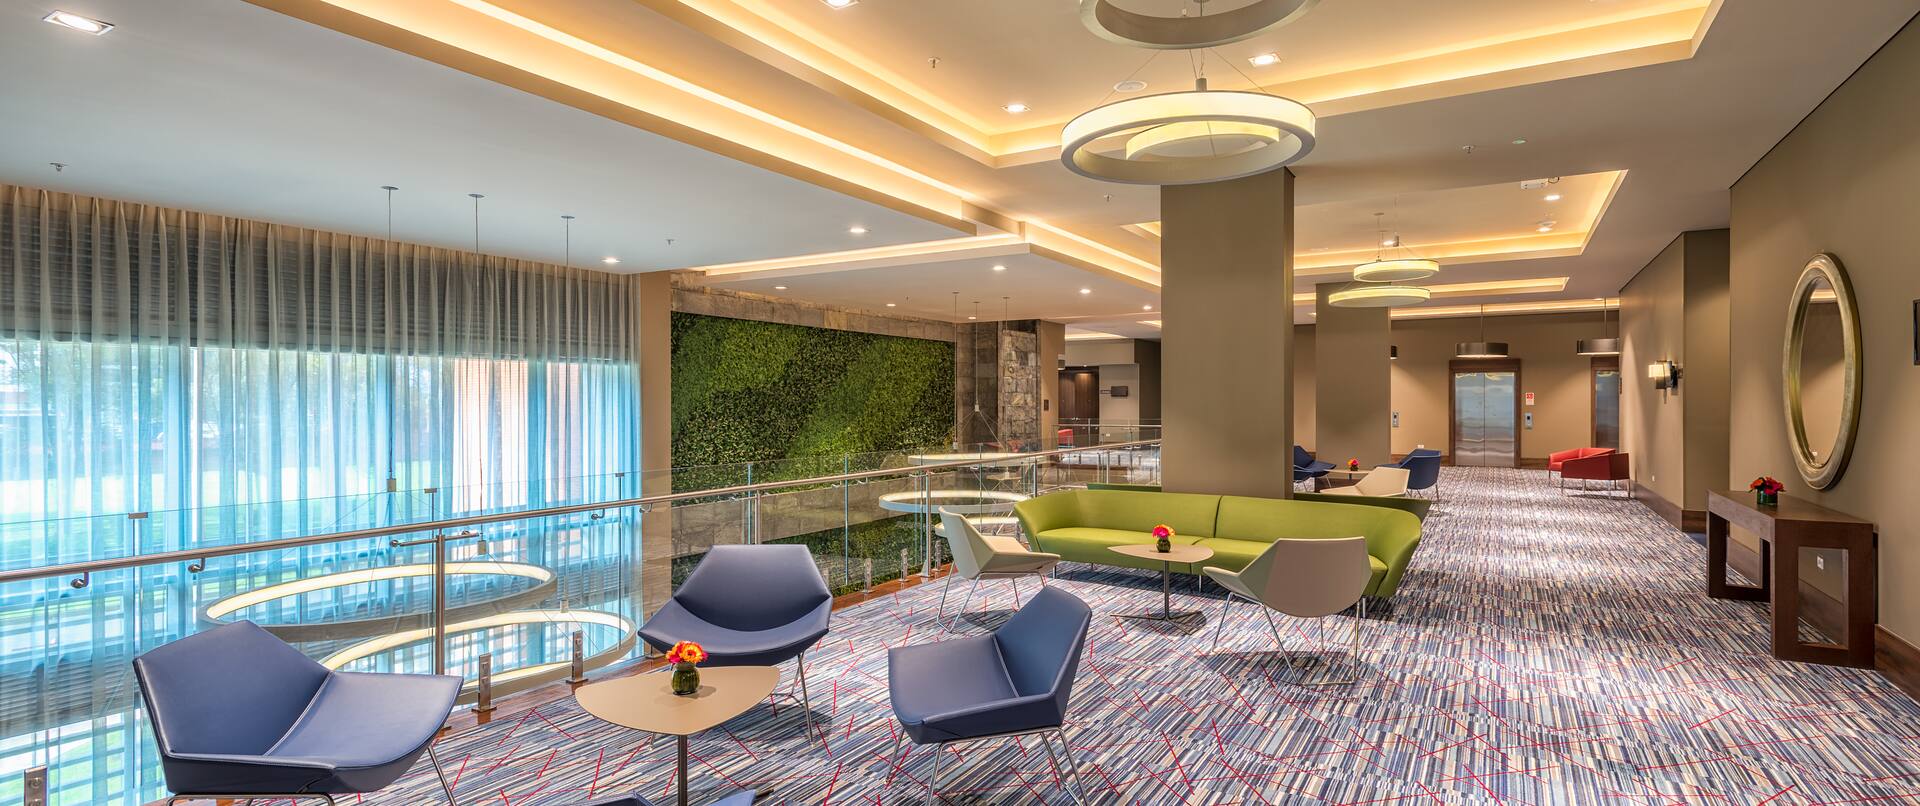 Lobby Seating Area with Chairs. Tables and Sofa